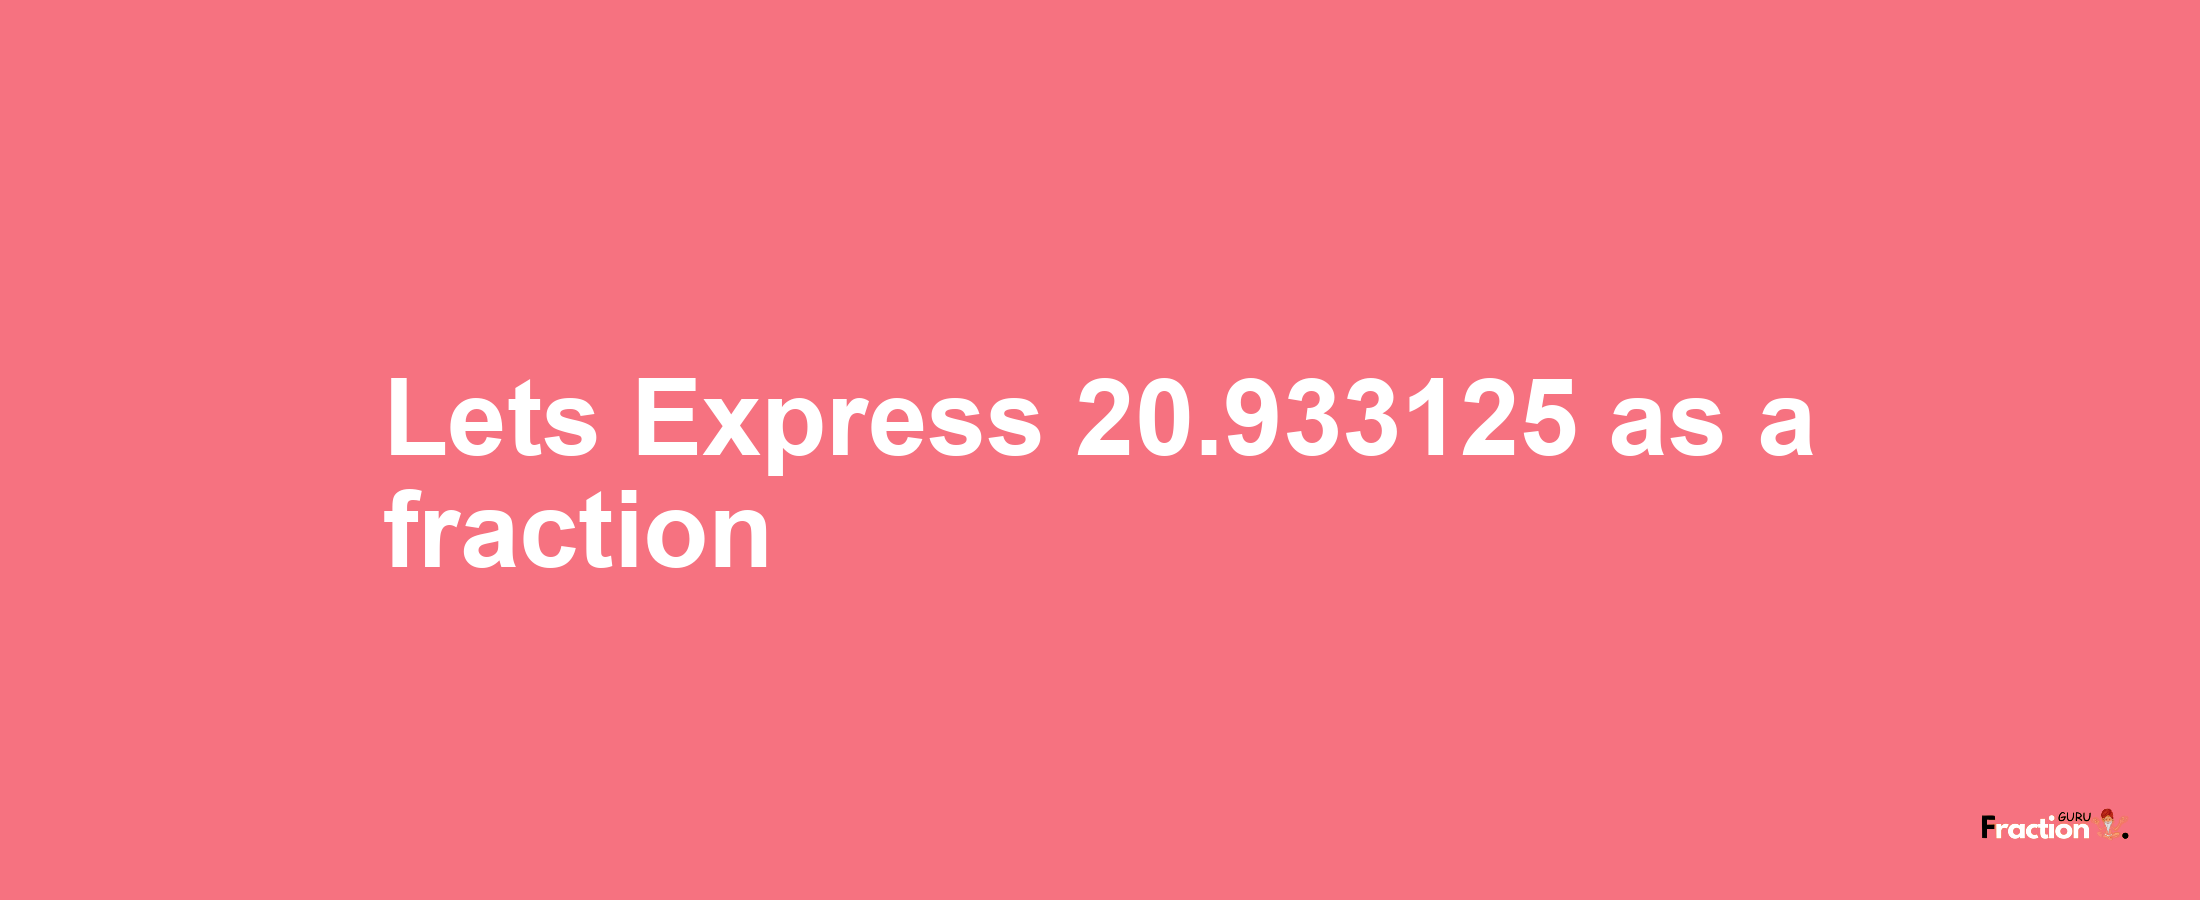 Lets Express 20.933125 as afraction